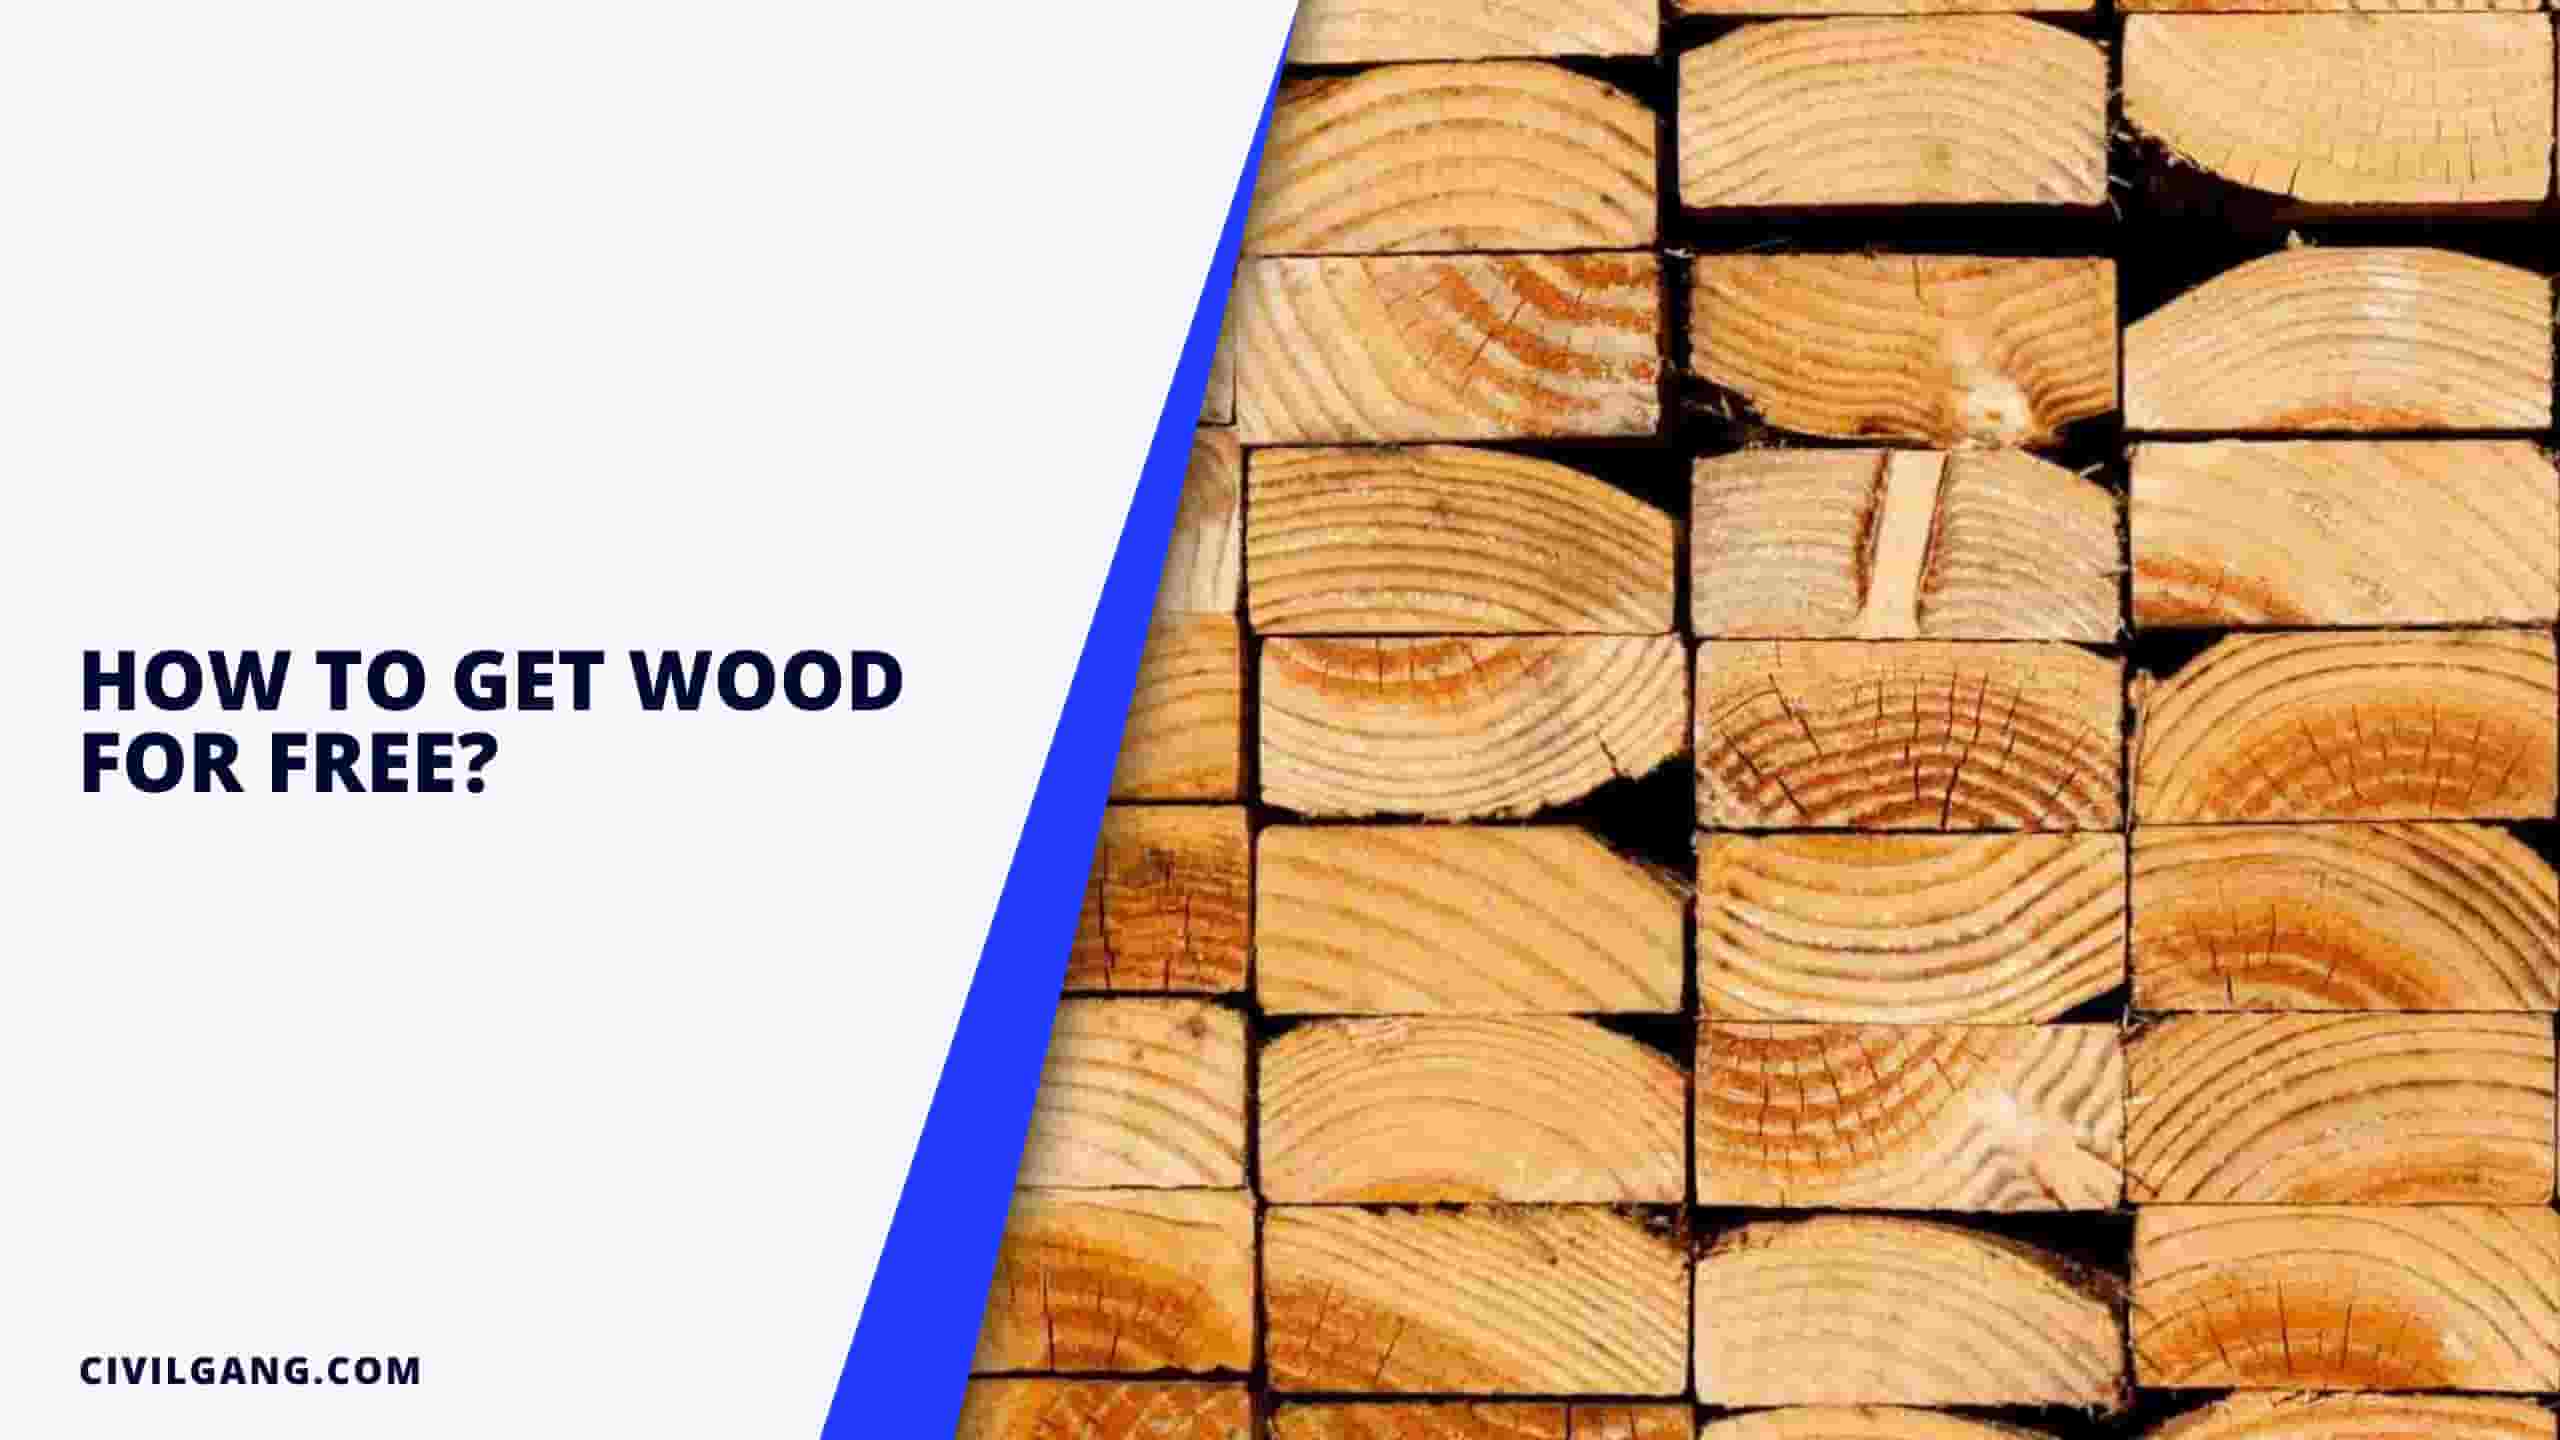 How to Get Wood for Free